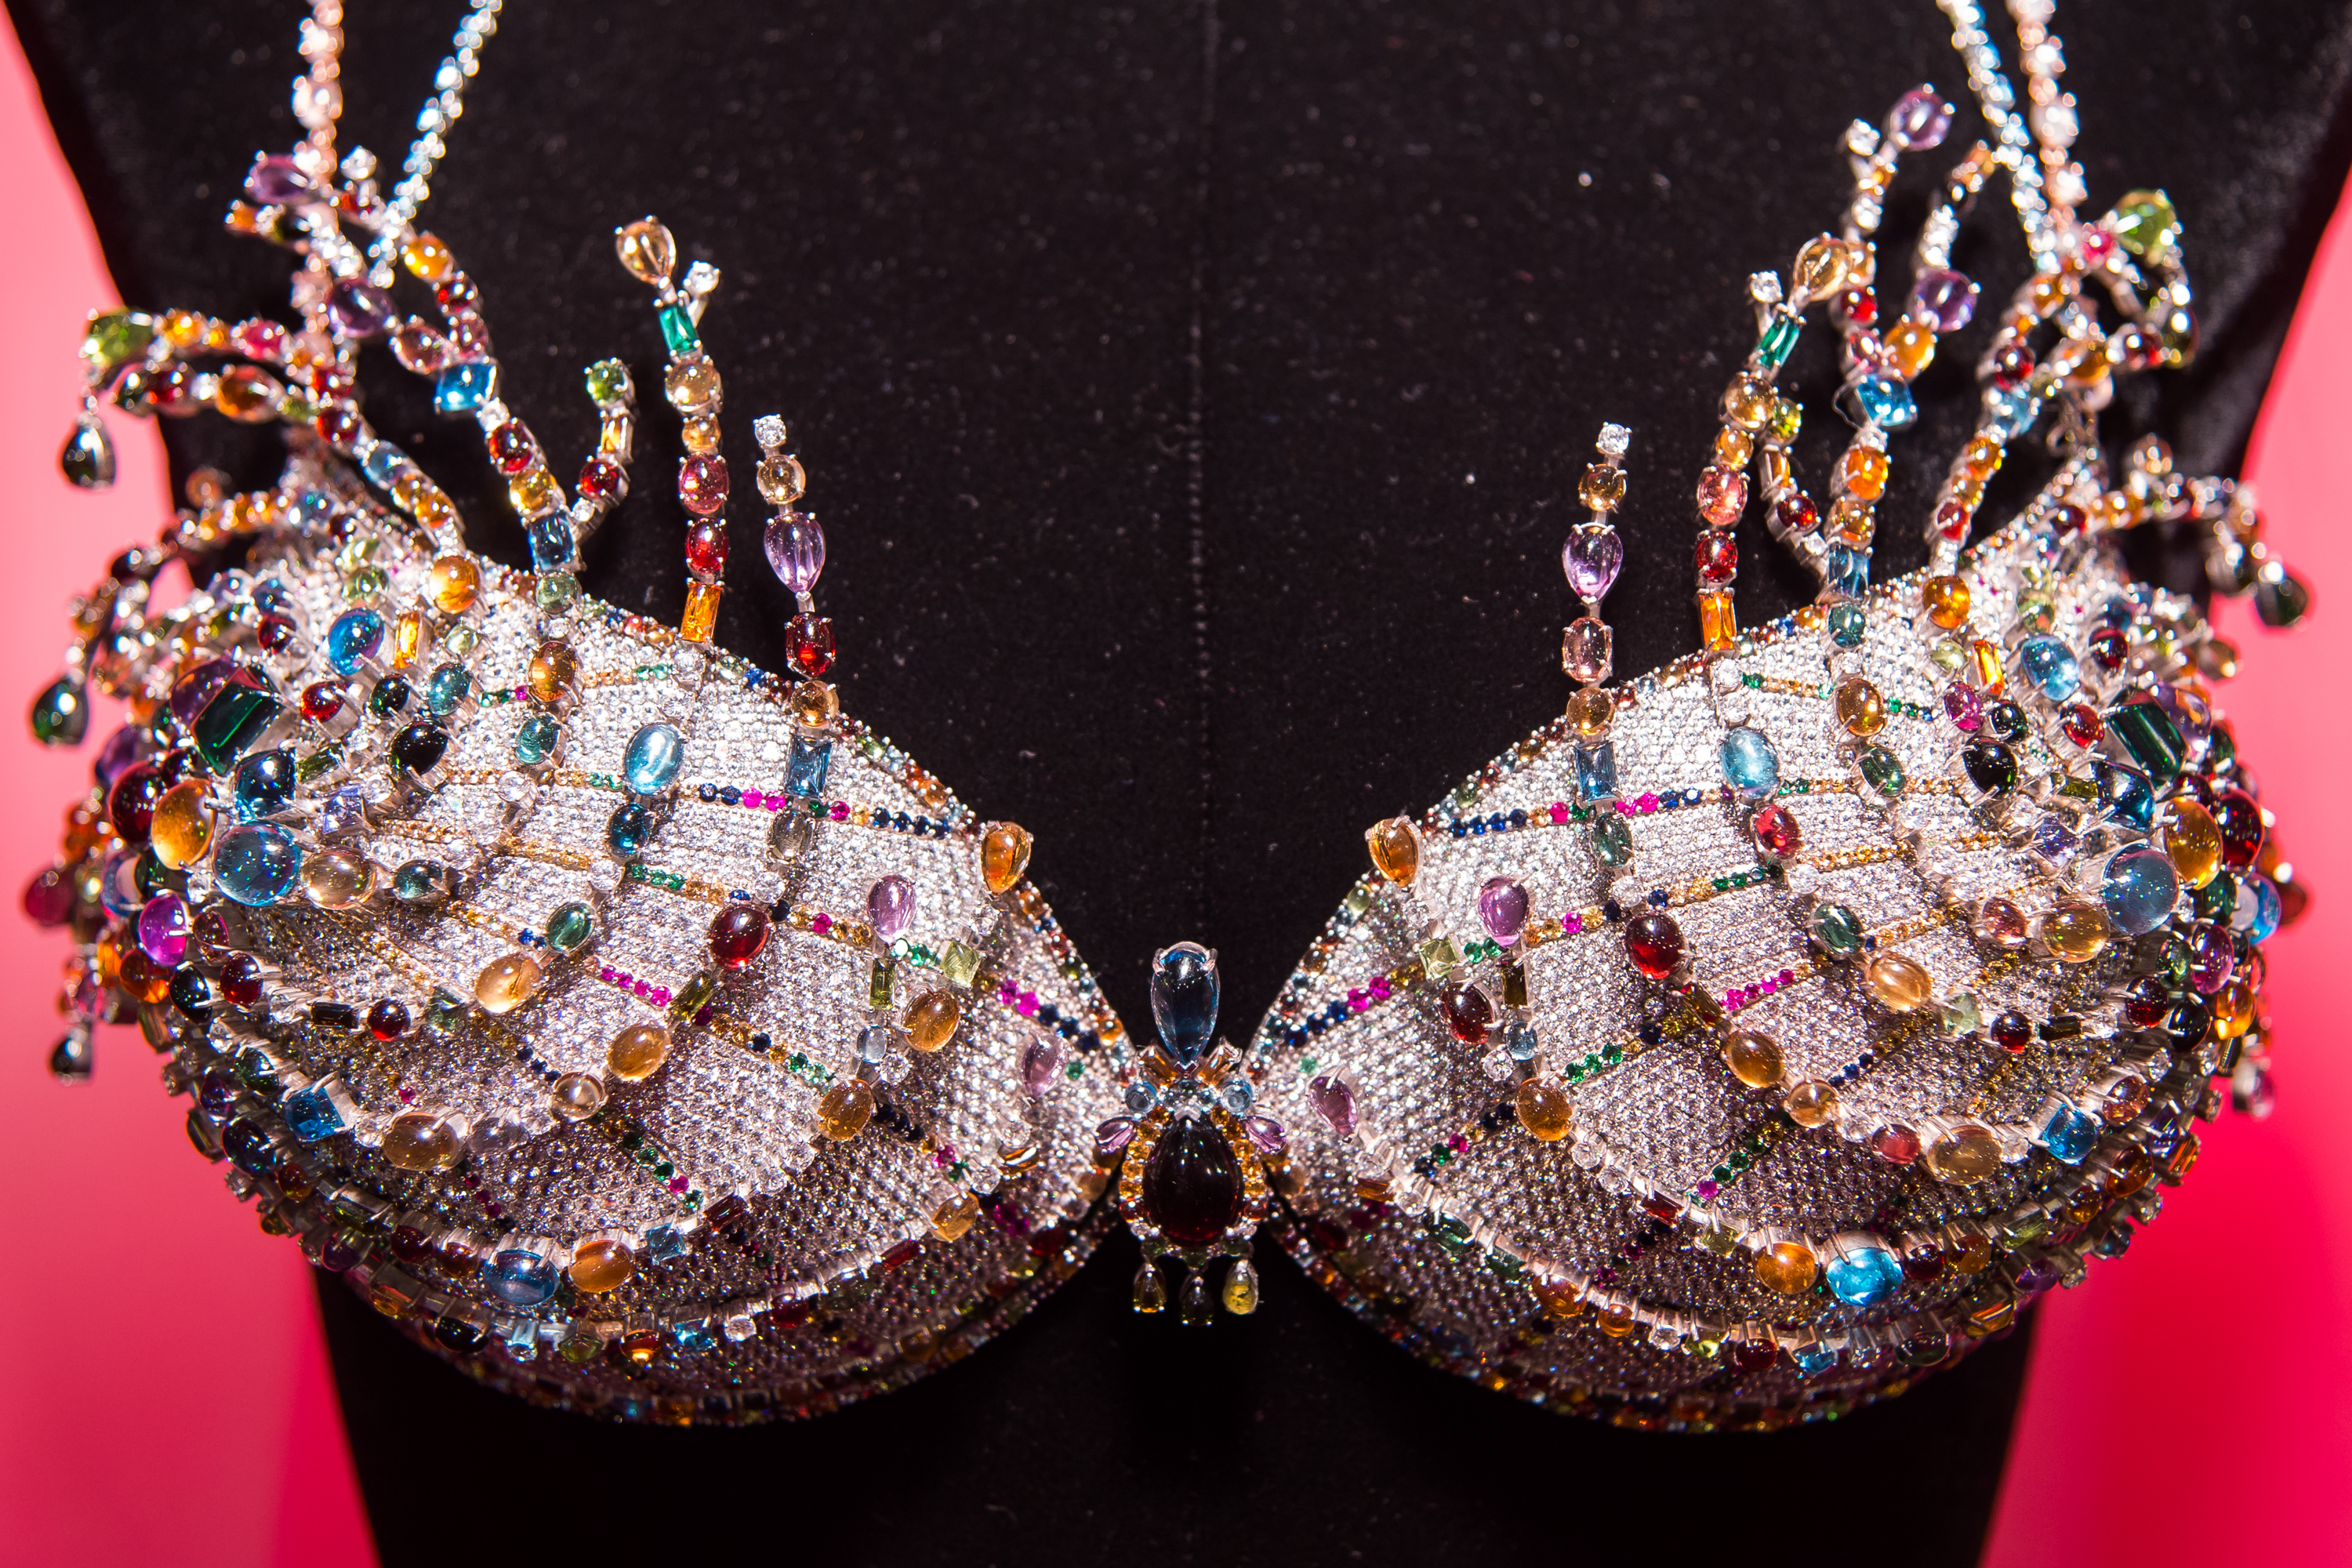 Mouawad - The Champagne Nights Fantasy Bra arrived in ()